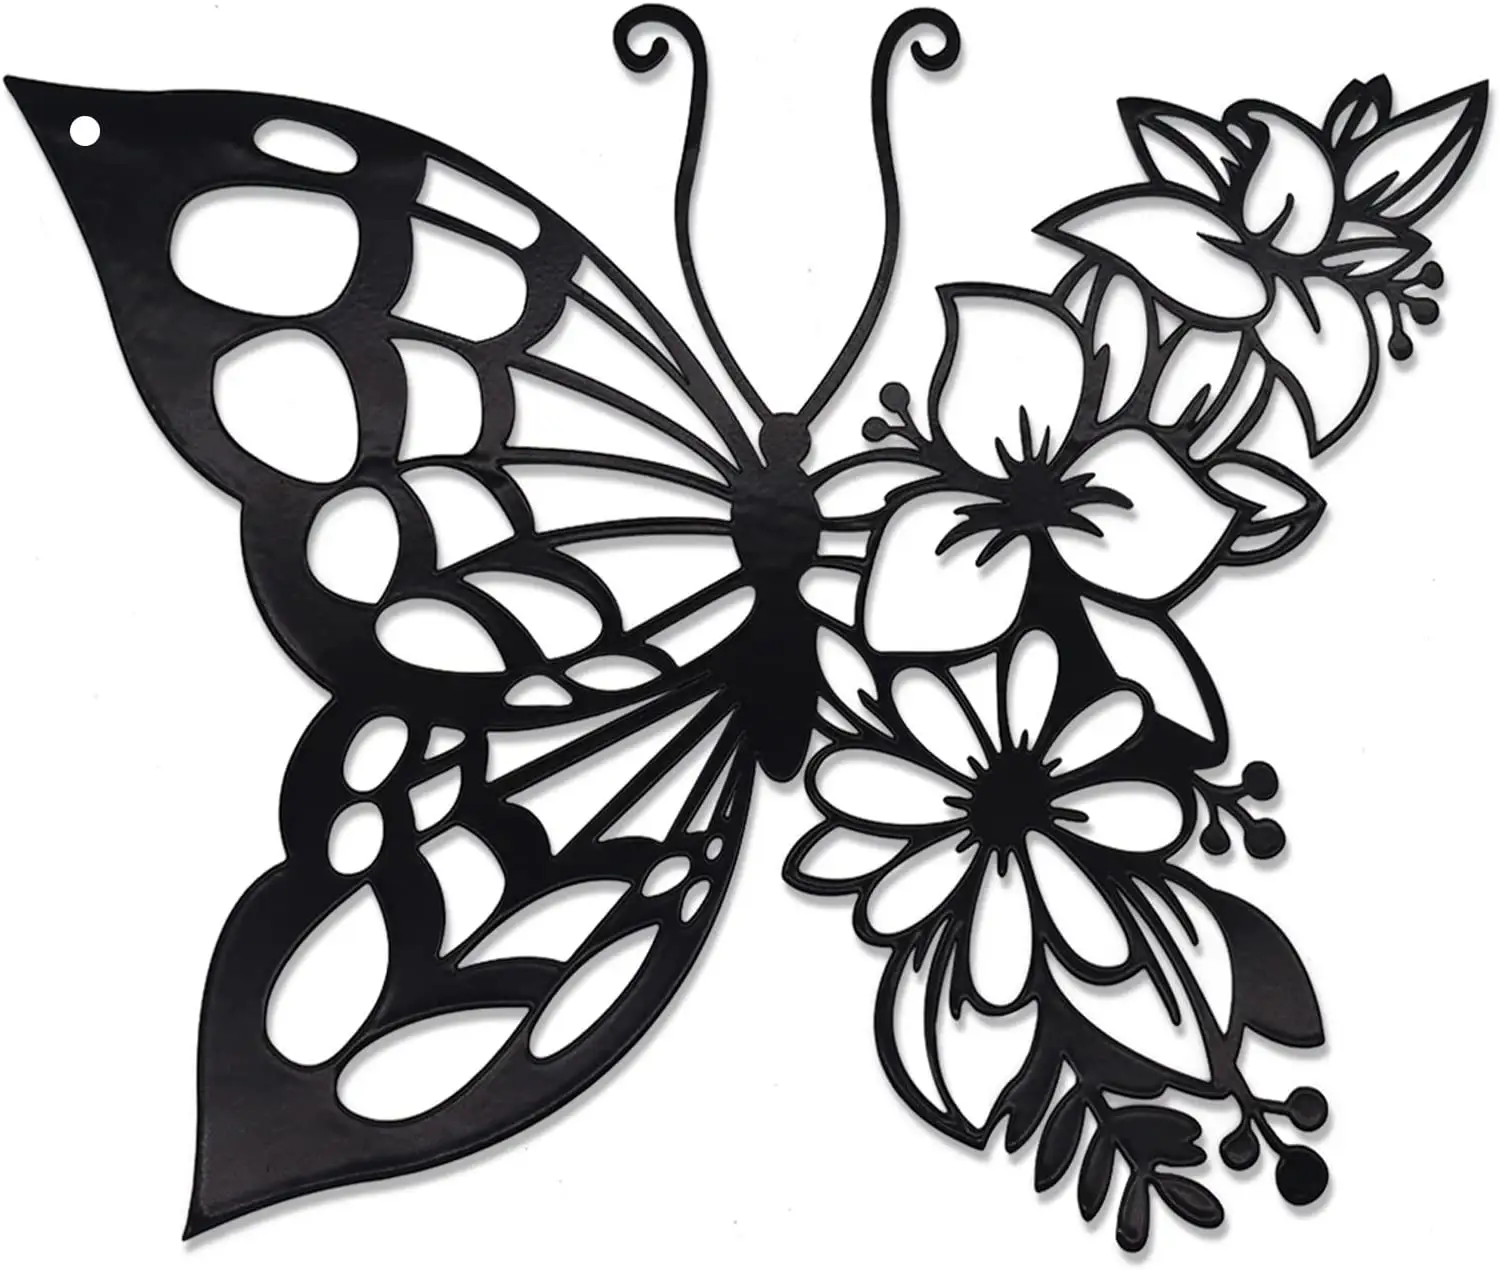 Black Butterfly Decoration Wall Art Home Decor Hanging Appearance Wall Decor Metal Hanging